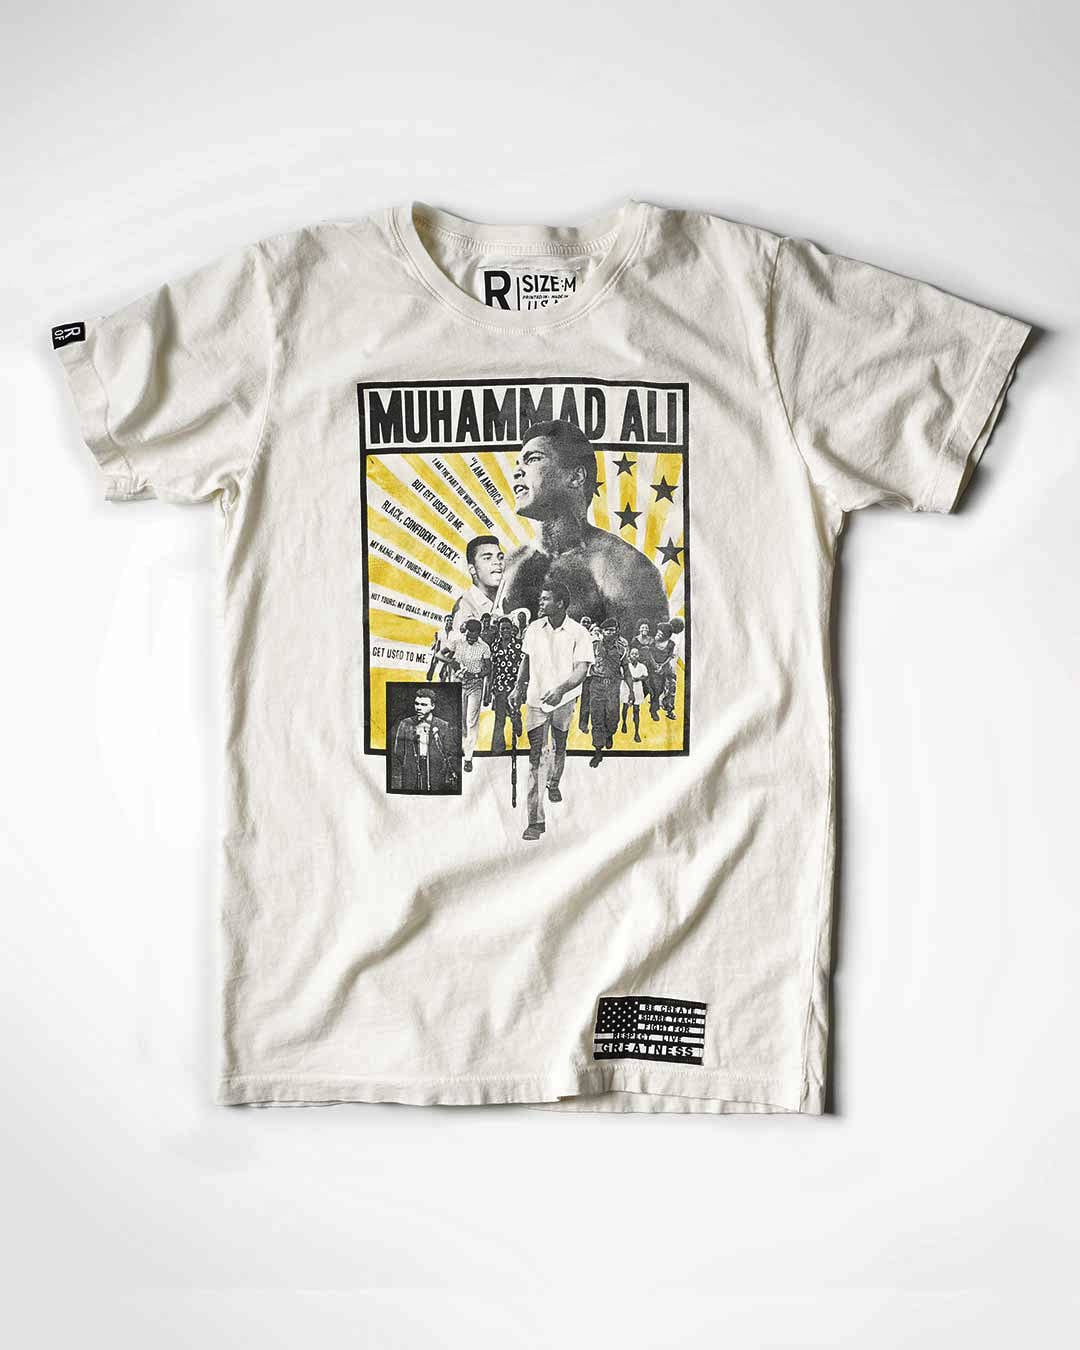 BHT - Ali &#39;Get Used to Me&#39; White Tee - Roots of Fight